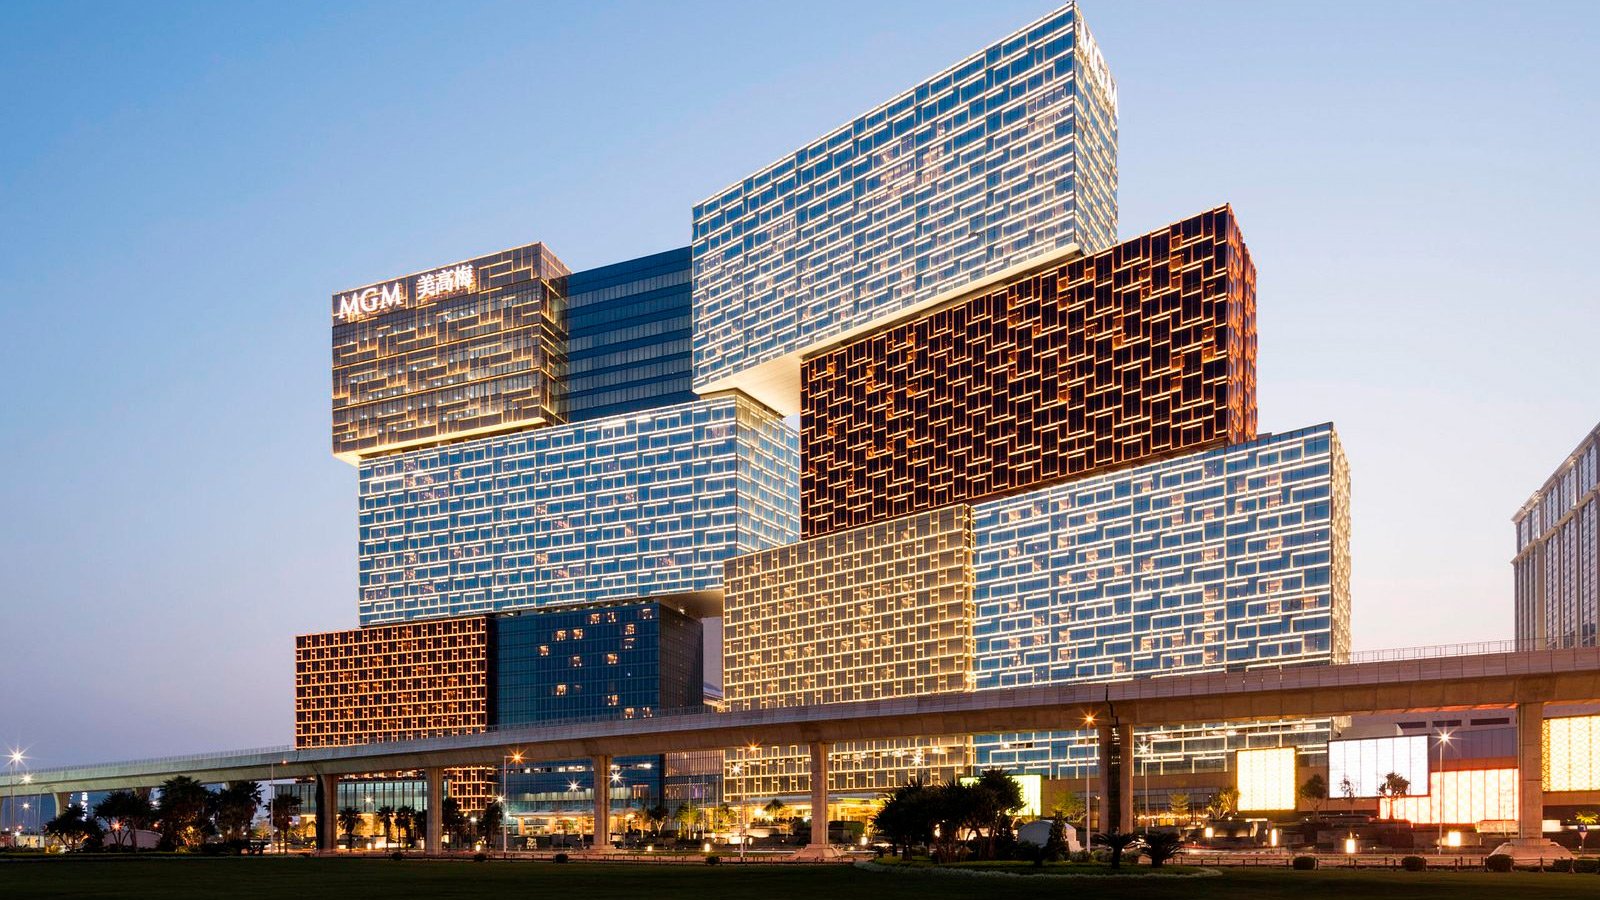 Macau's MGM Cotai on lockdown with guests and staff inside as Covid-19 cases resurface